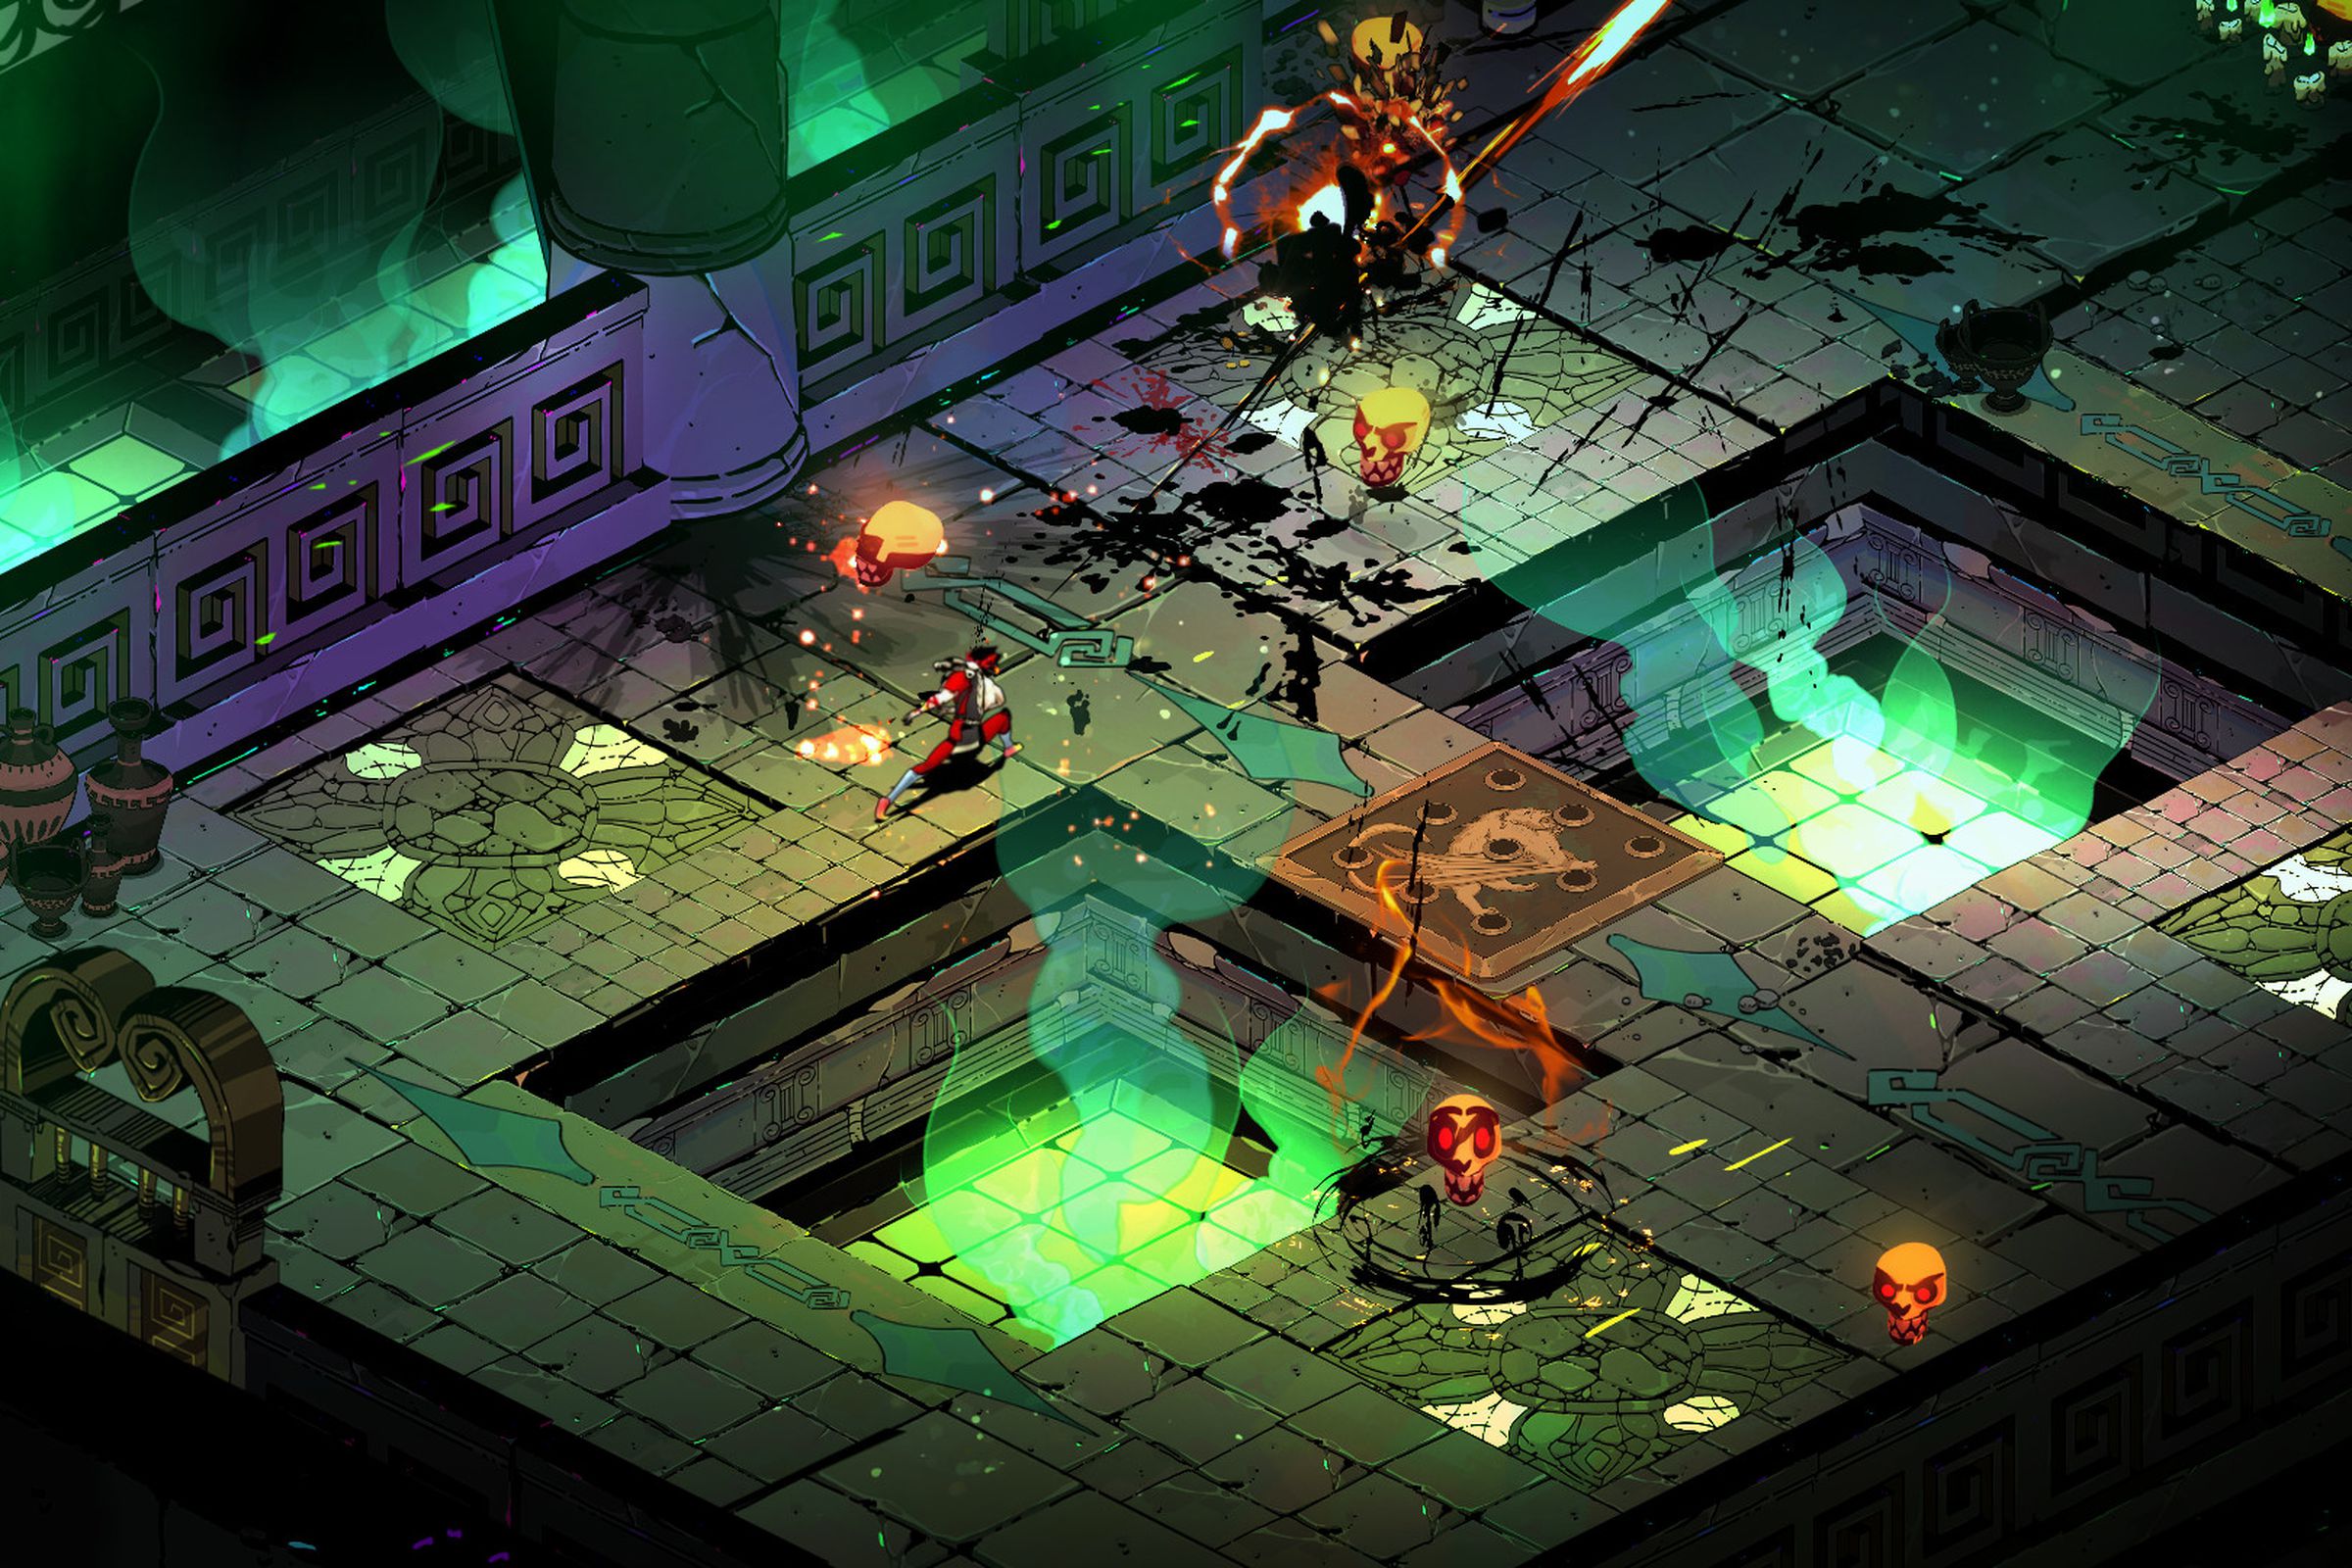 A screenshot from the video game Hades.